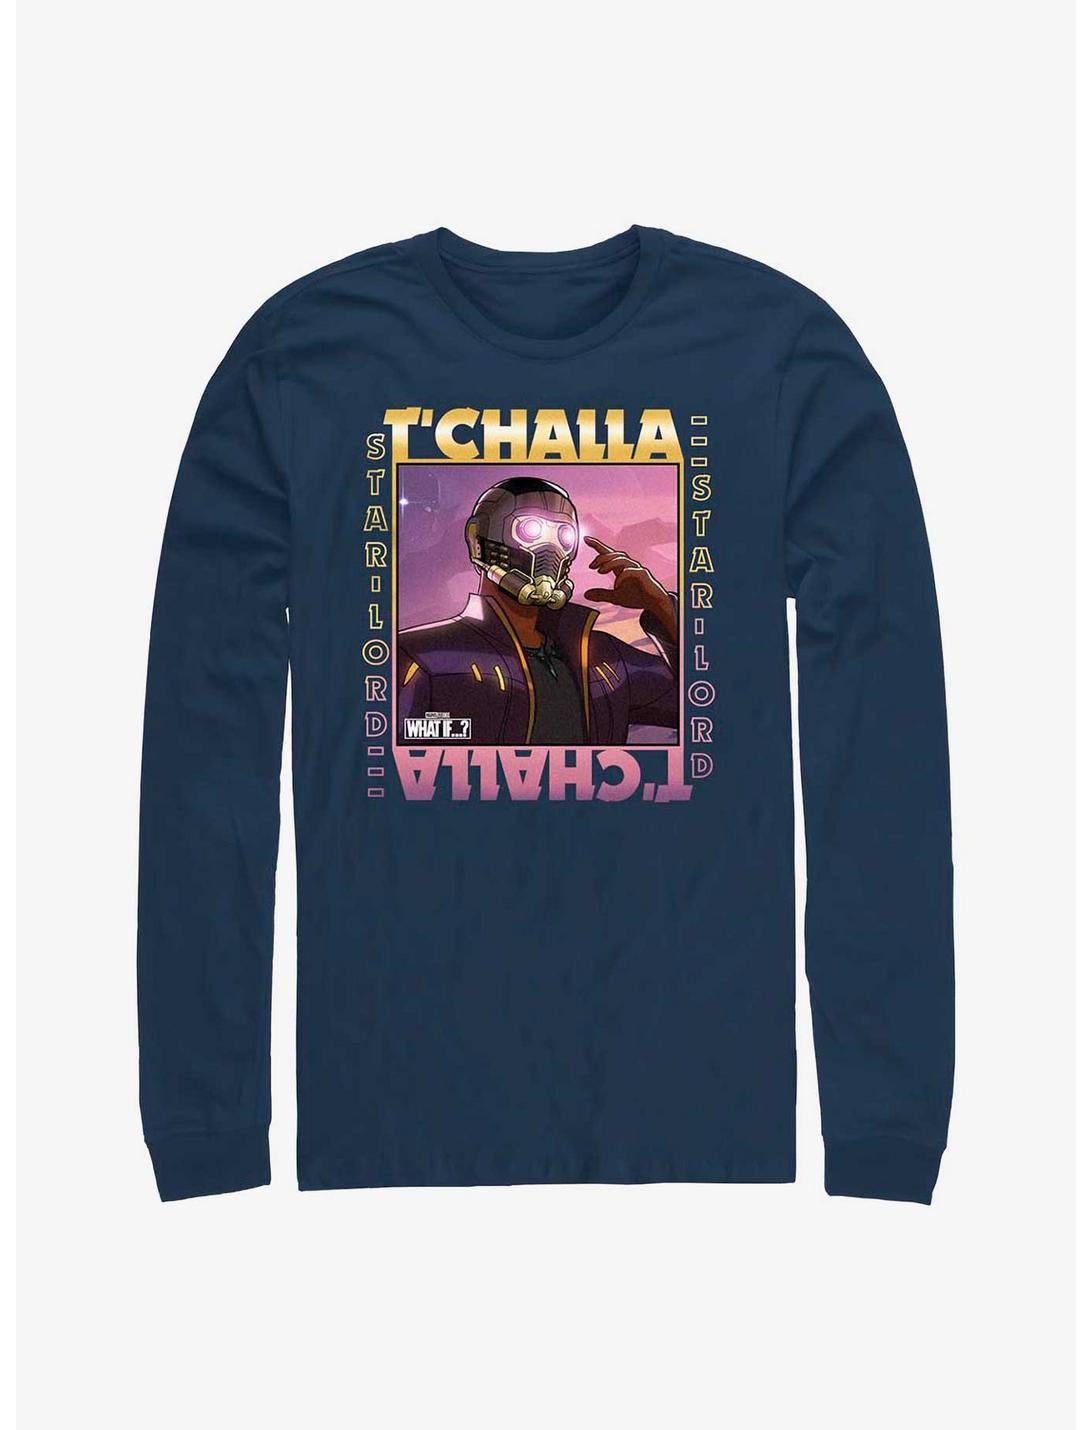 Marvel What If...? T'Challa Star-Lord Long-Sleeve T-Shirt, NAVY, hi-res